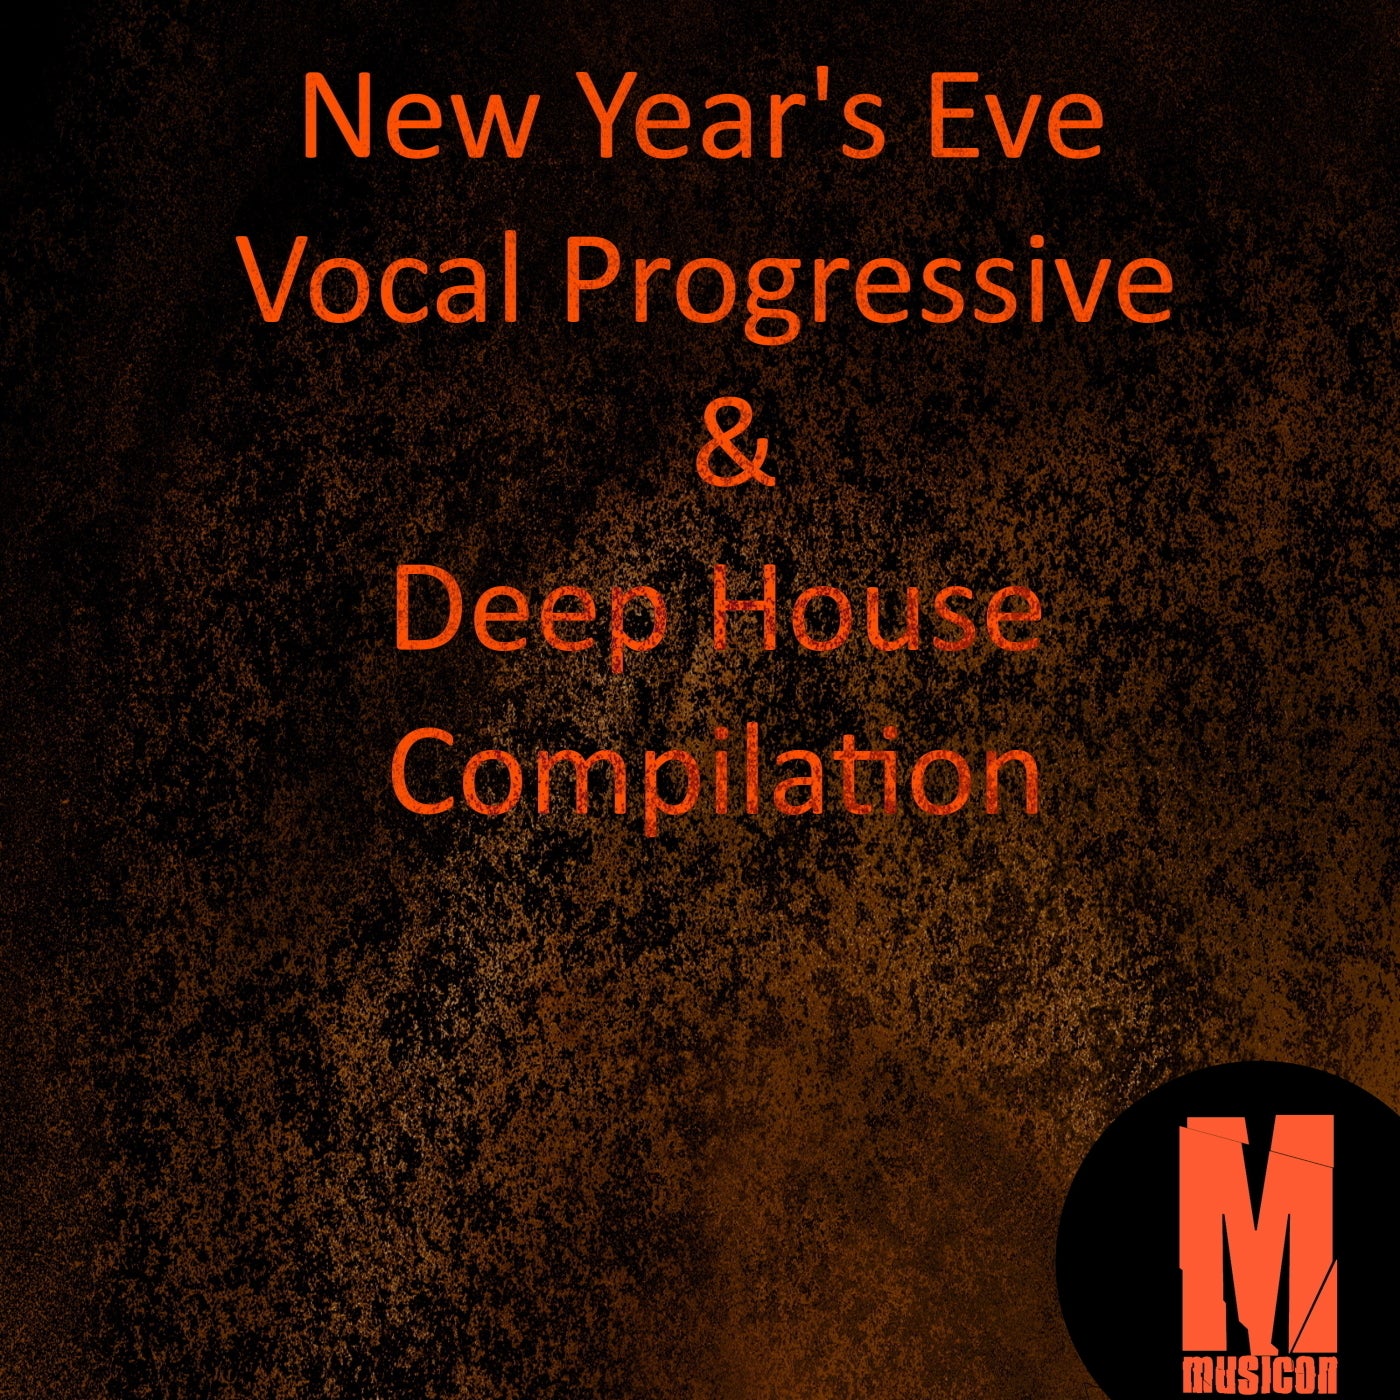 New Year's Eve Vocal Progressive & Deep House Compilation